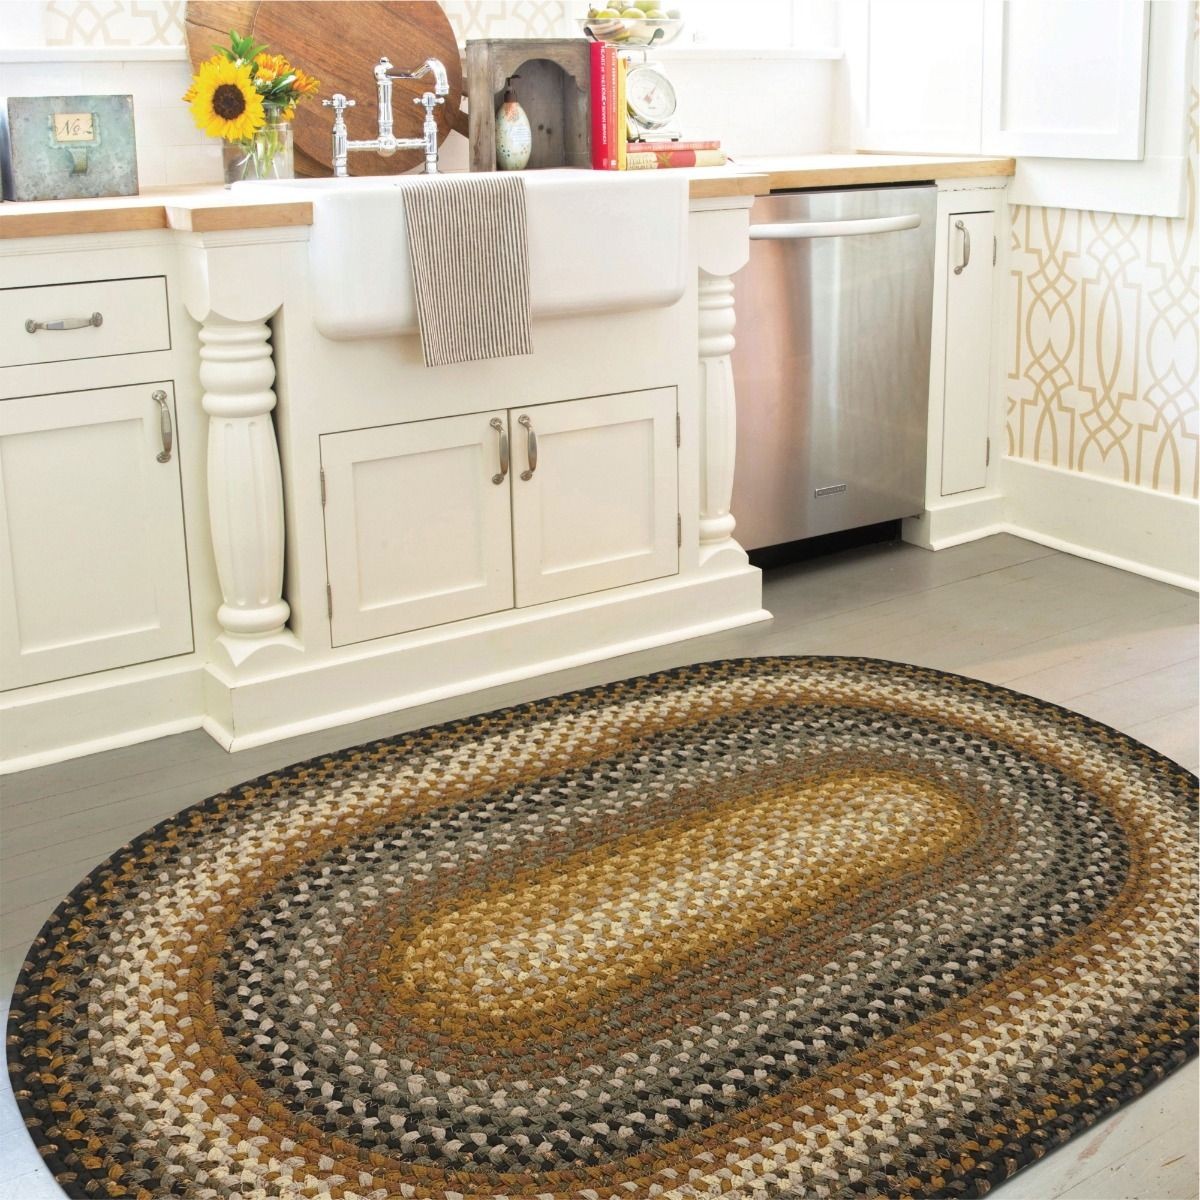 Cocoa Bean Brown and Black Cotton Braided Oval Rugs